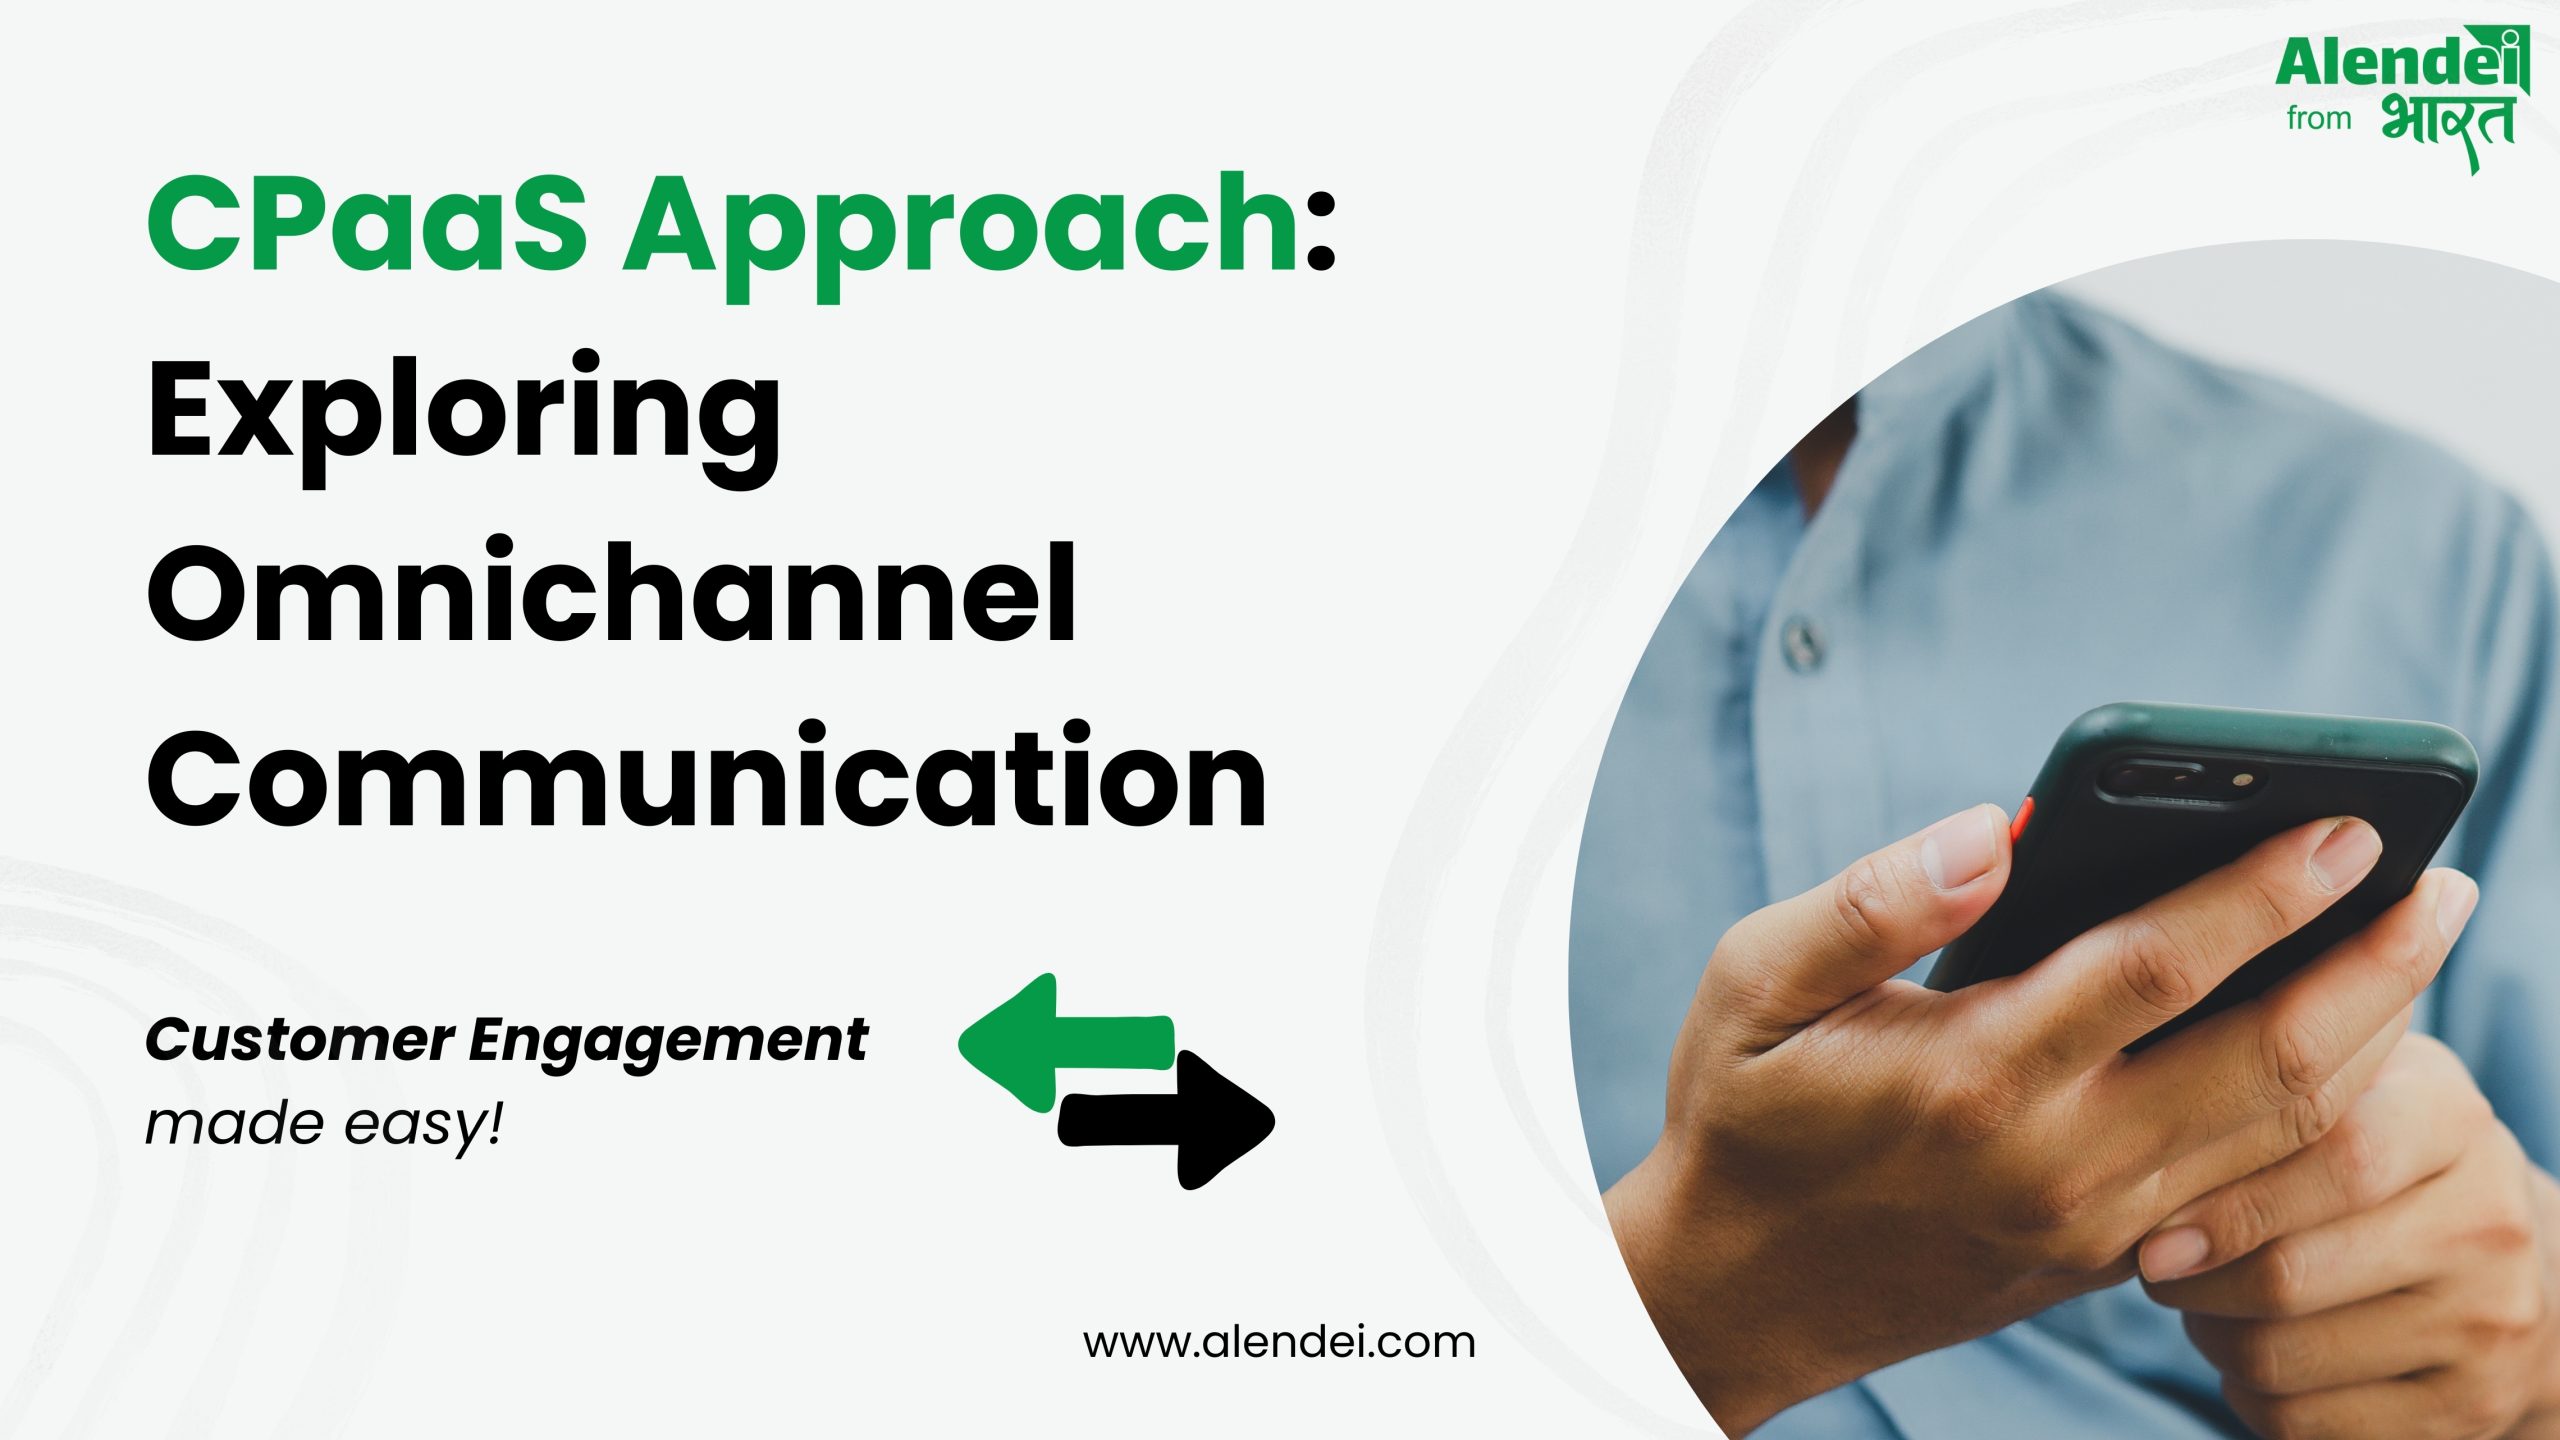 CPaaS Approach: Exploring Omnichannel Communication